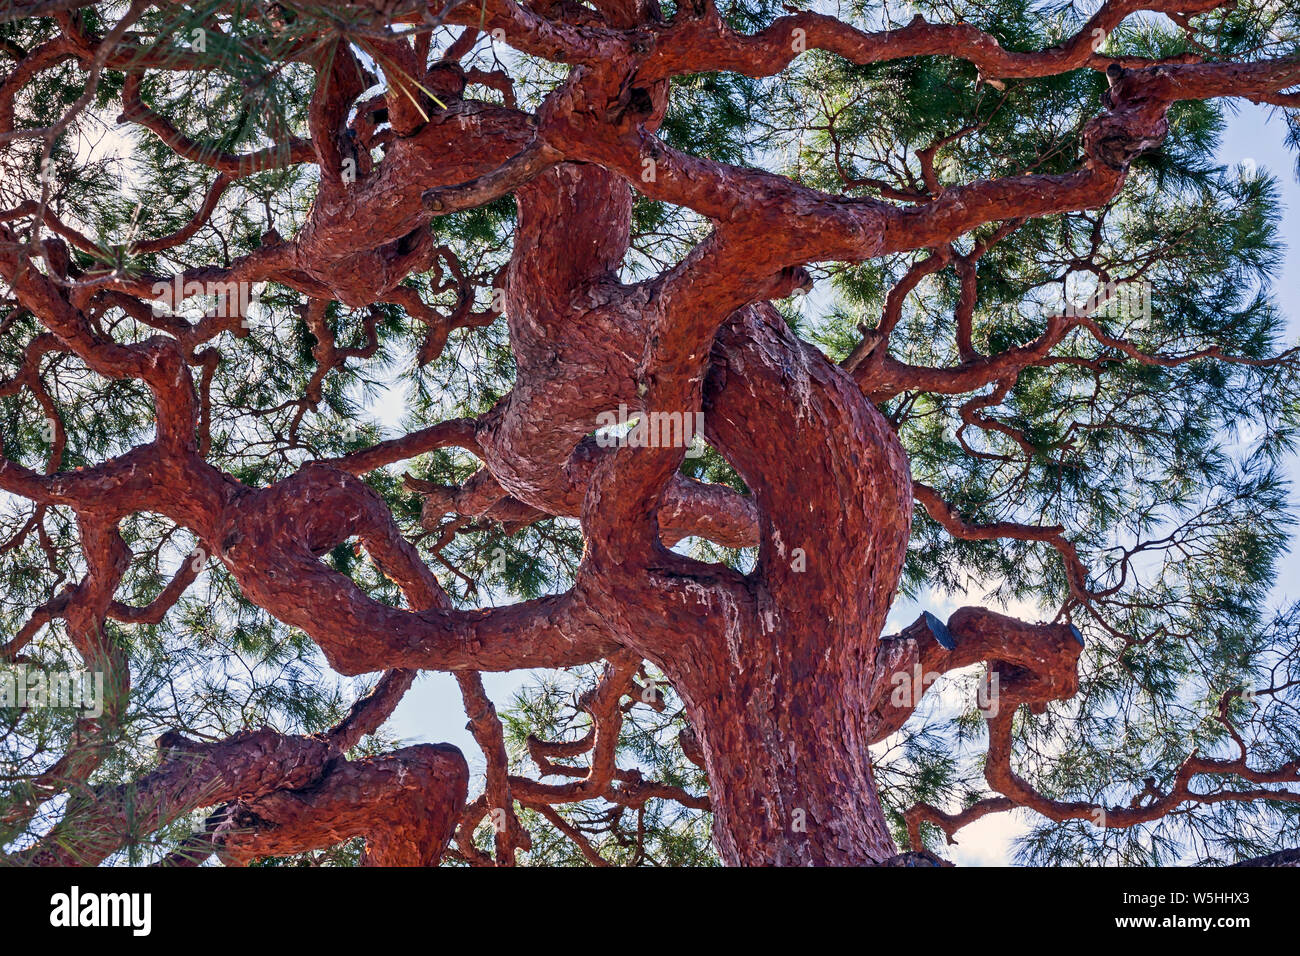 Looking up at the red bark and twisting branches of a Japanese red pine, Pinus densiflora, at the Tenryuji Temple (Tenryū Shiseizen-ji), Kyoto, Japan. Stock Photo